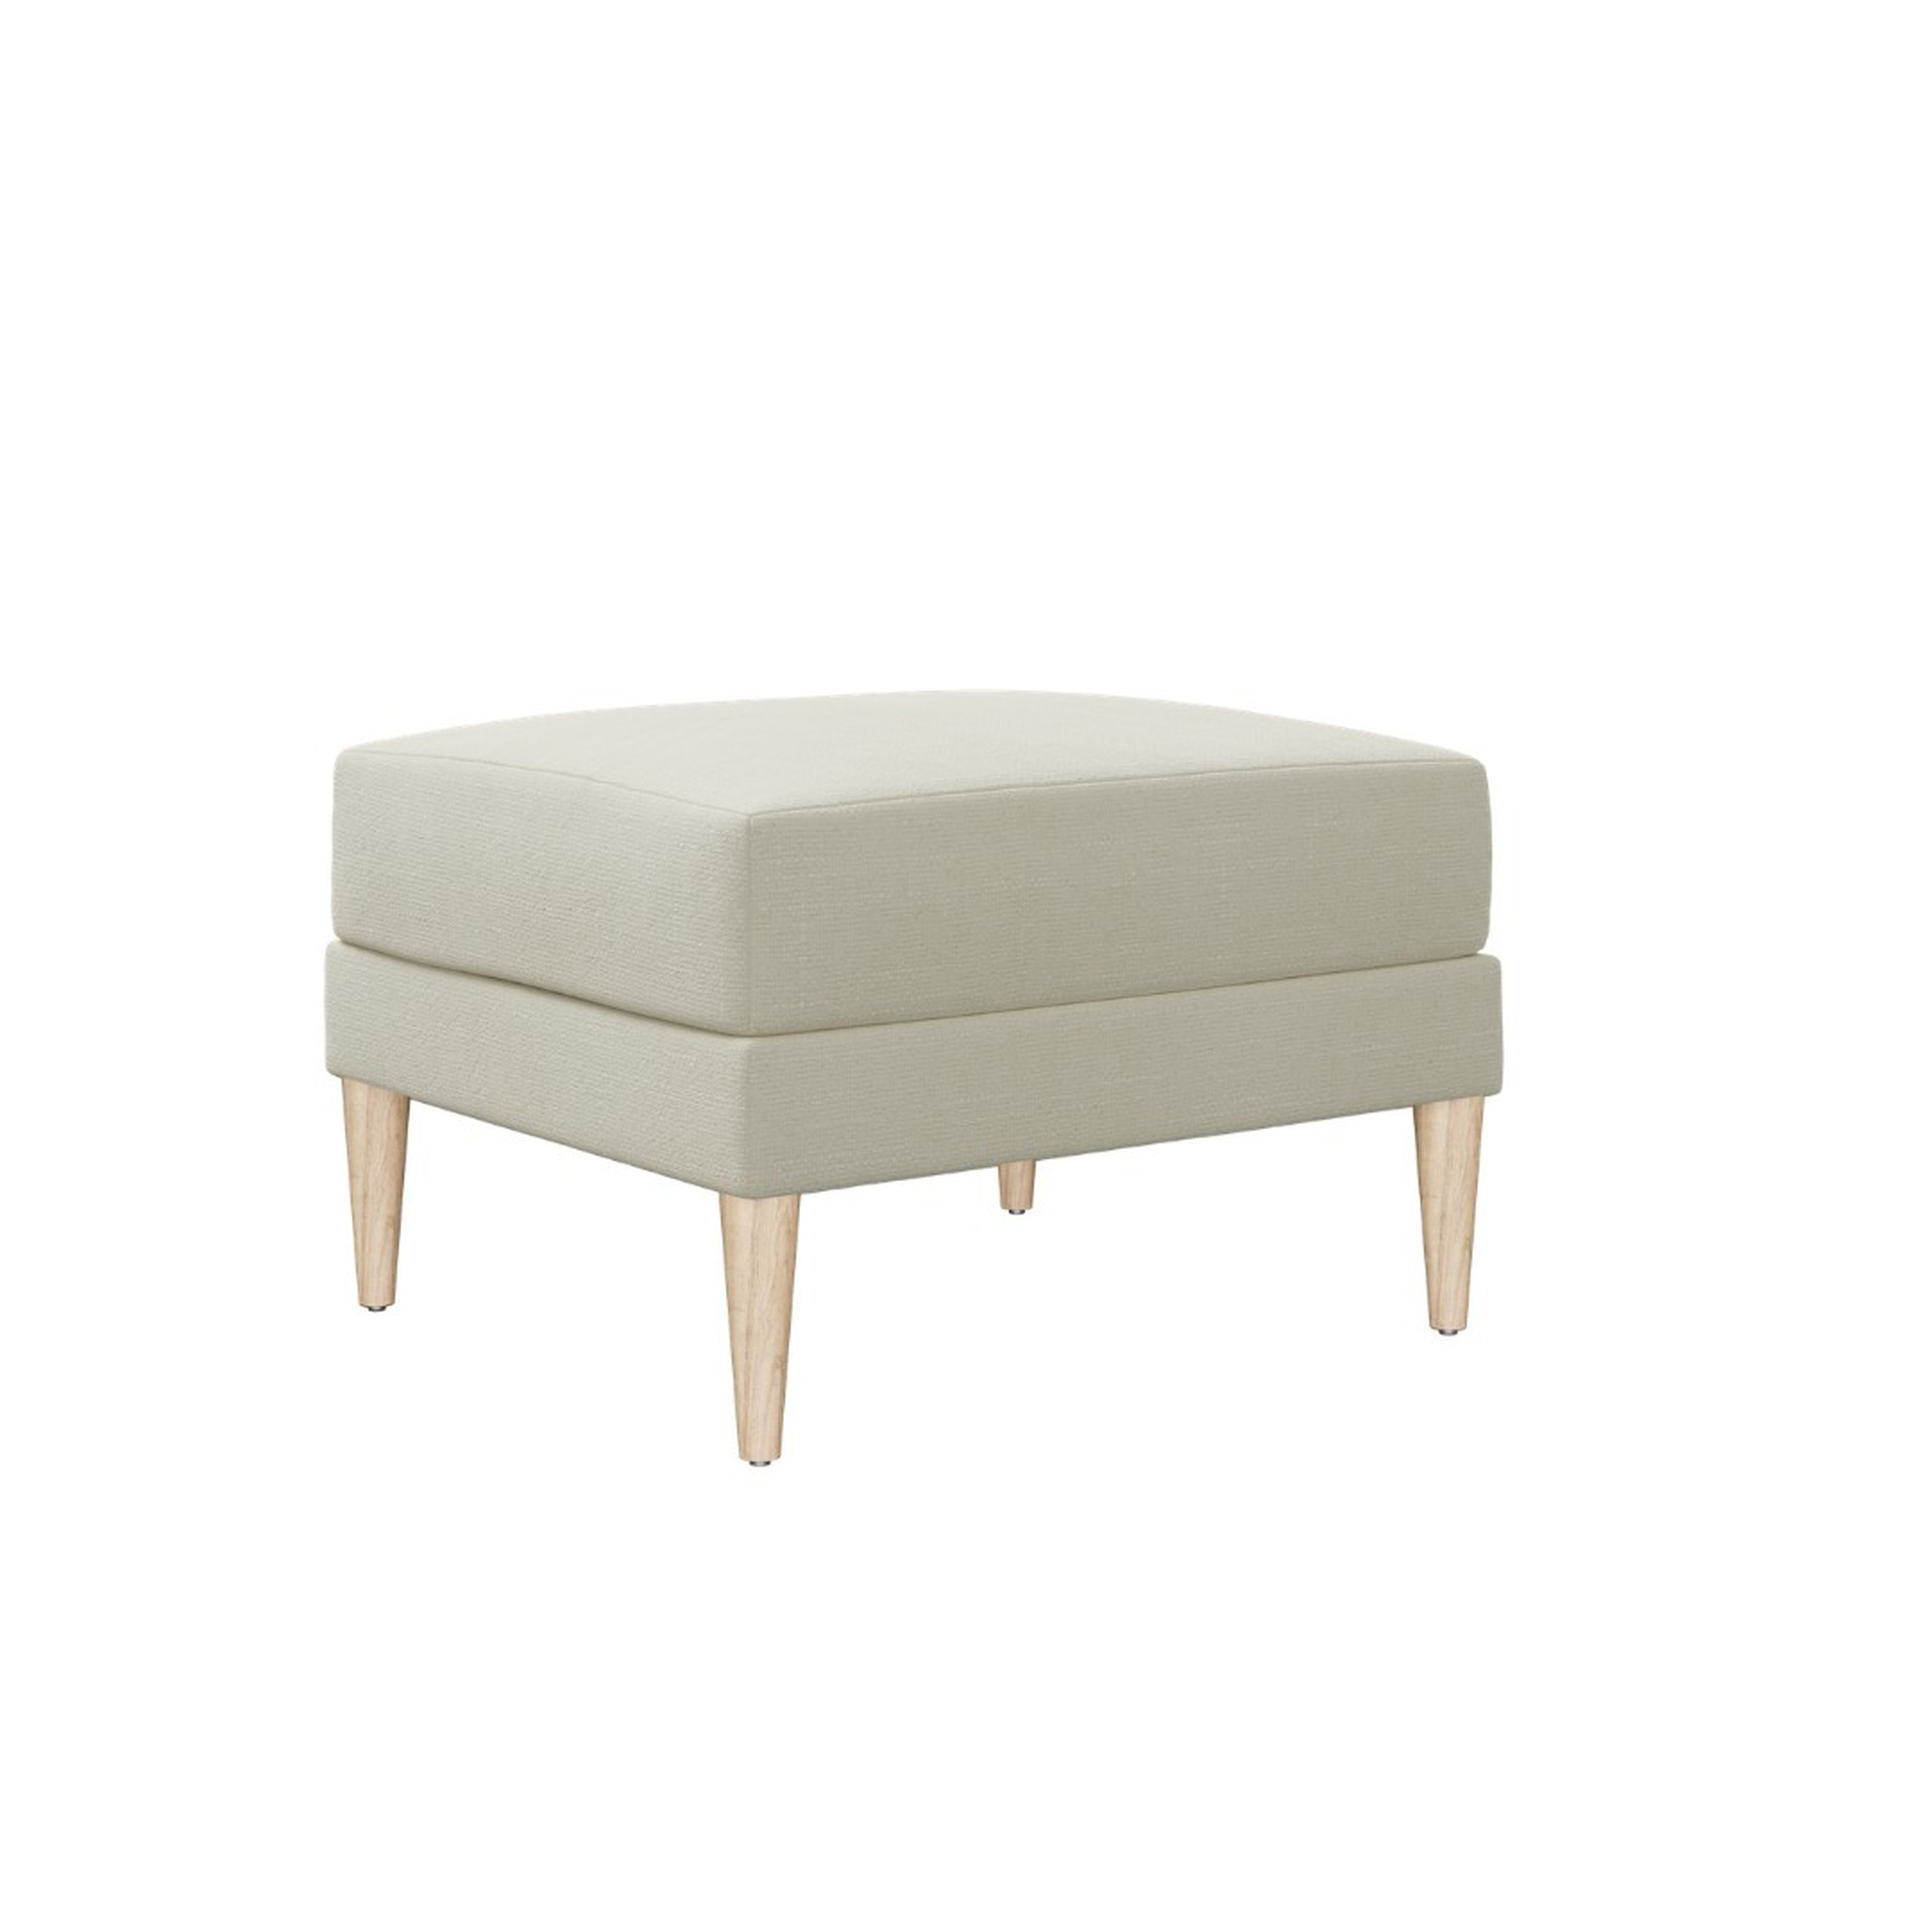 The Essential Ottoman, Oat Upcycled Poly, Natural Legs - Sabai Design